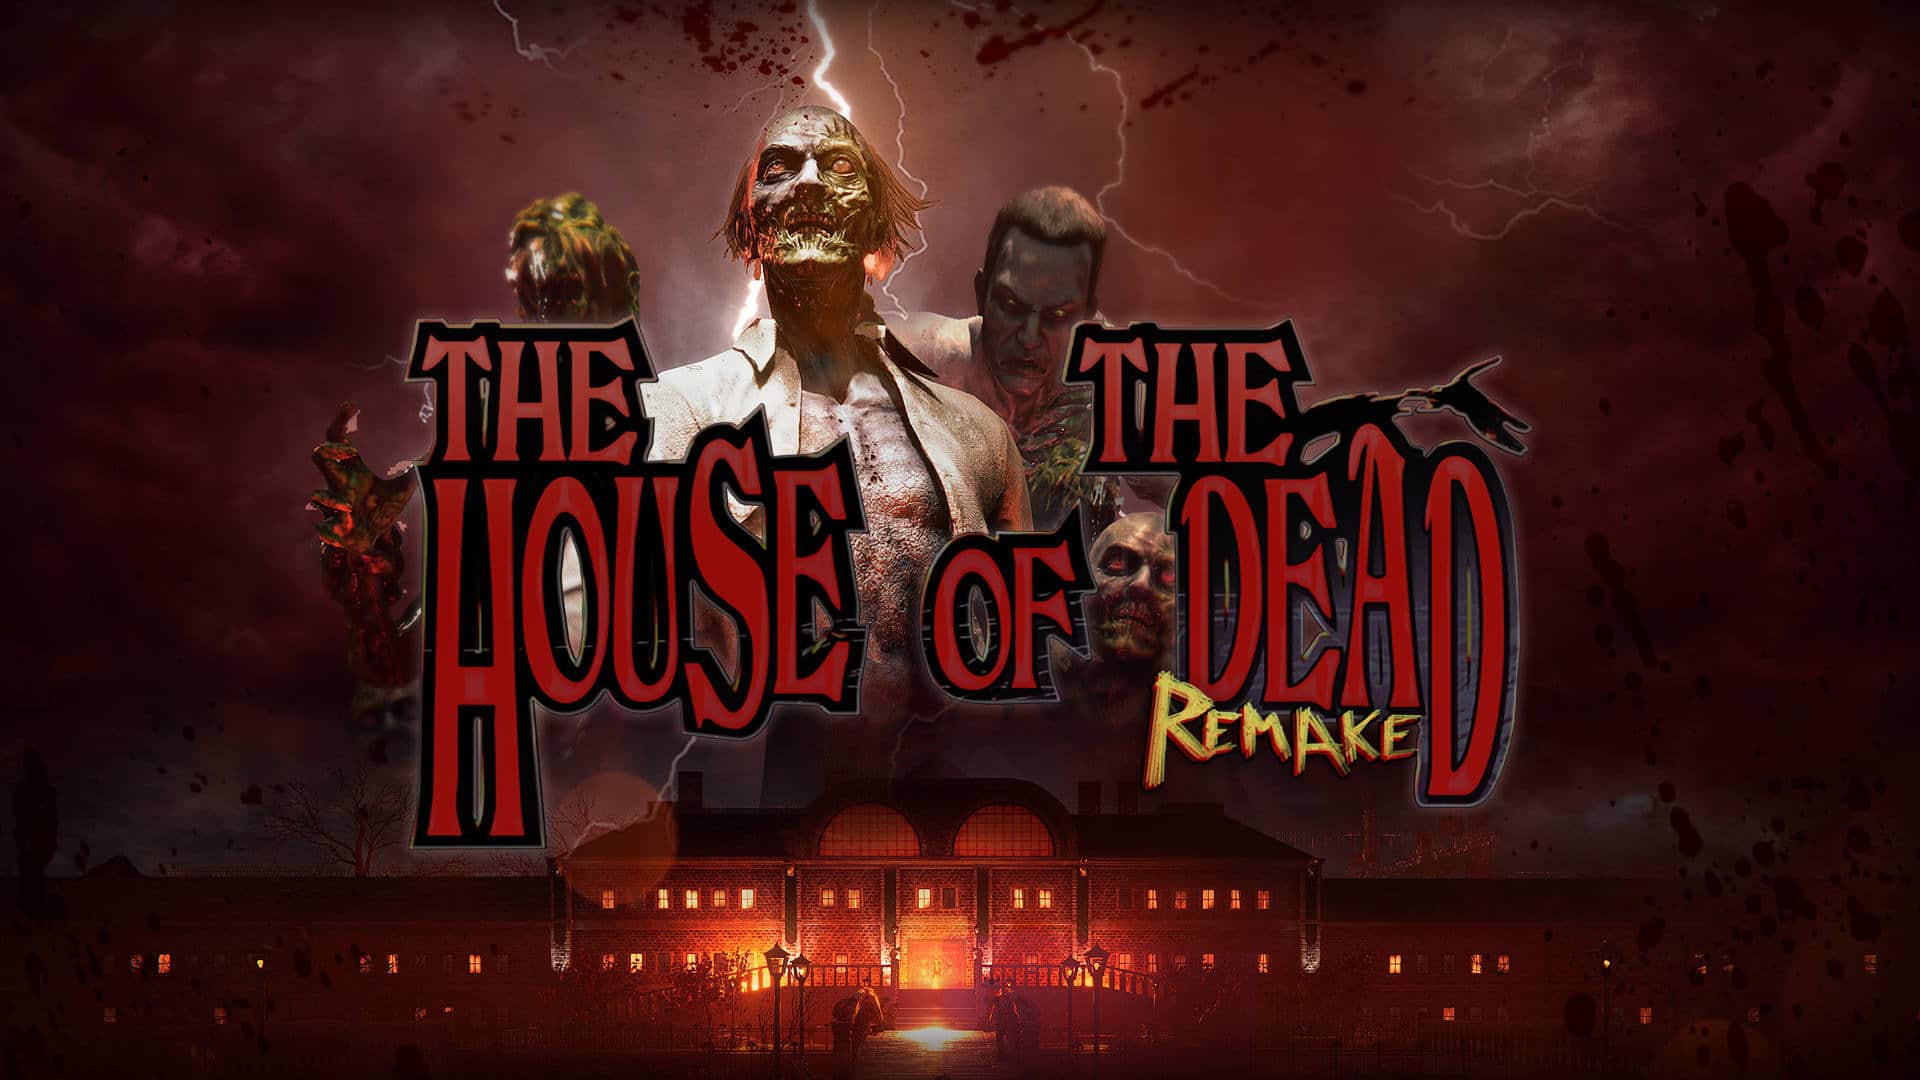 THE HOUSE OF THE DEAD Remake, GamersRD